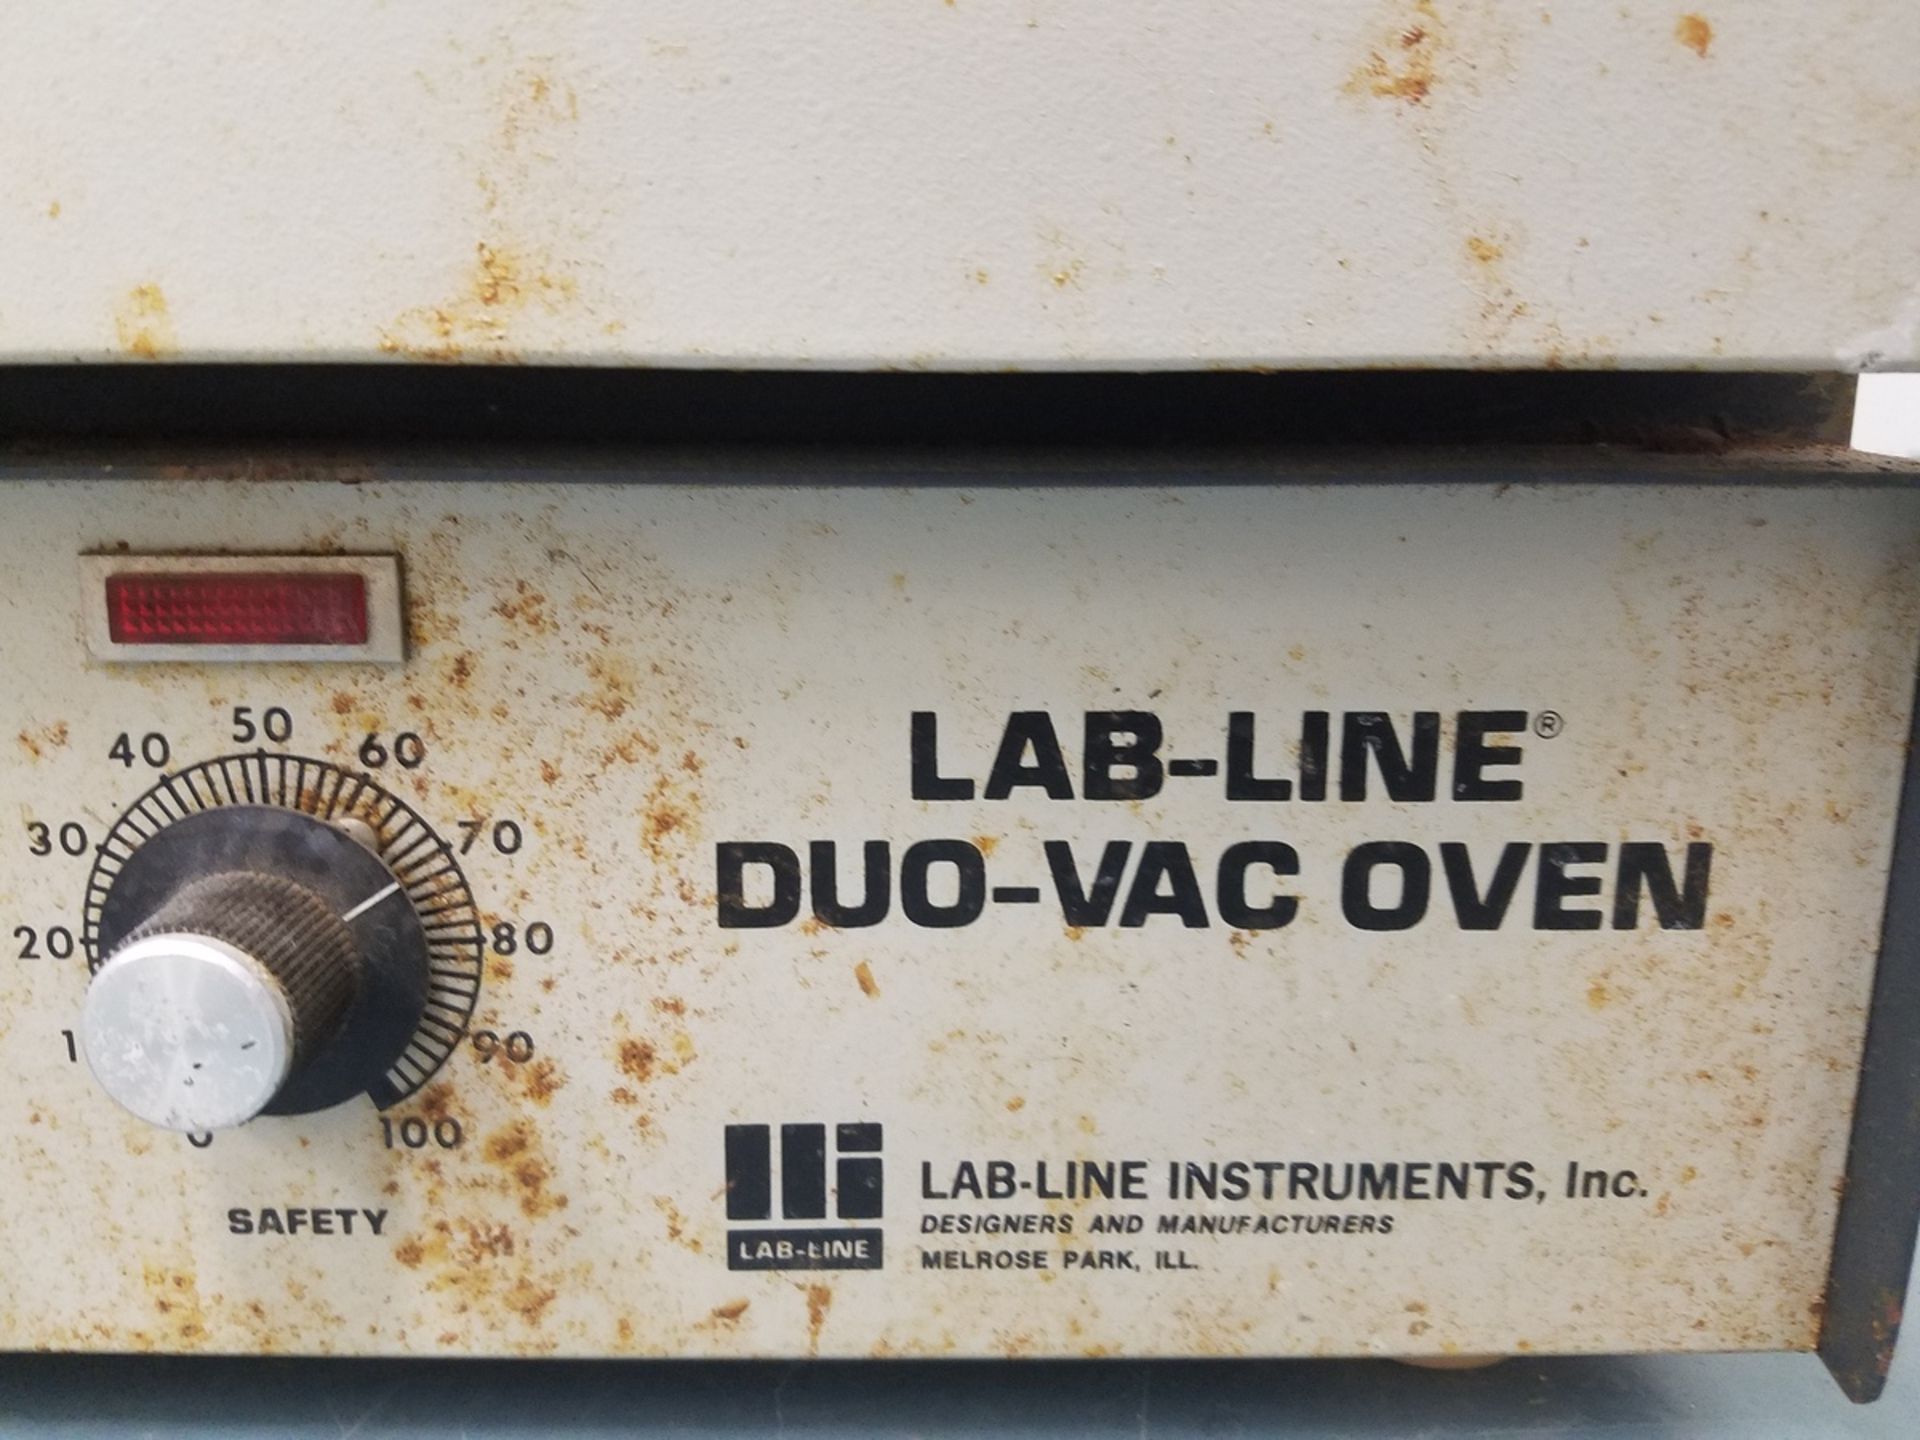 Lab-Line Duo-Vac Oven | Rig Fee: $20 - Image 2 of 3